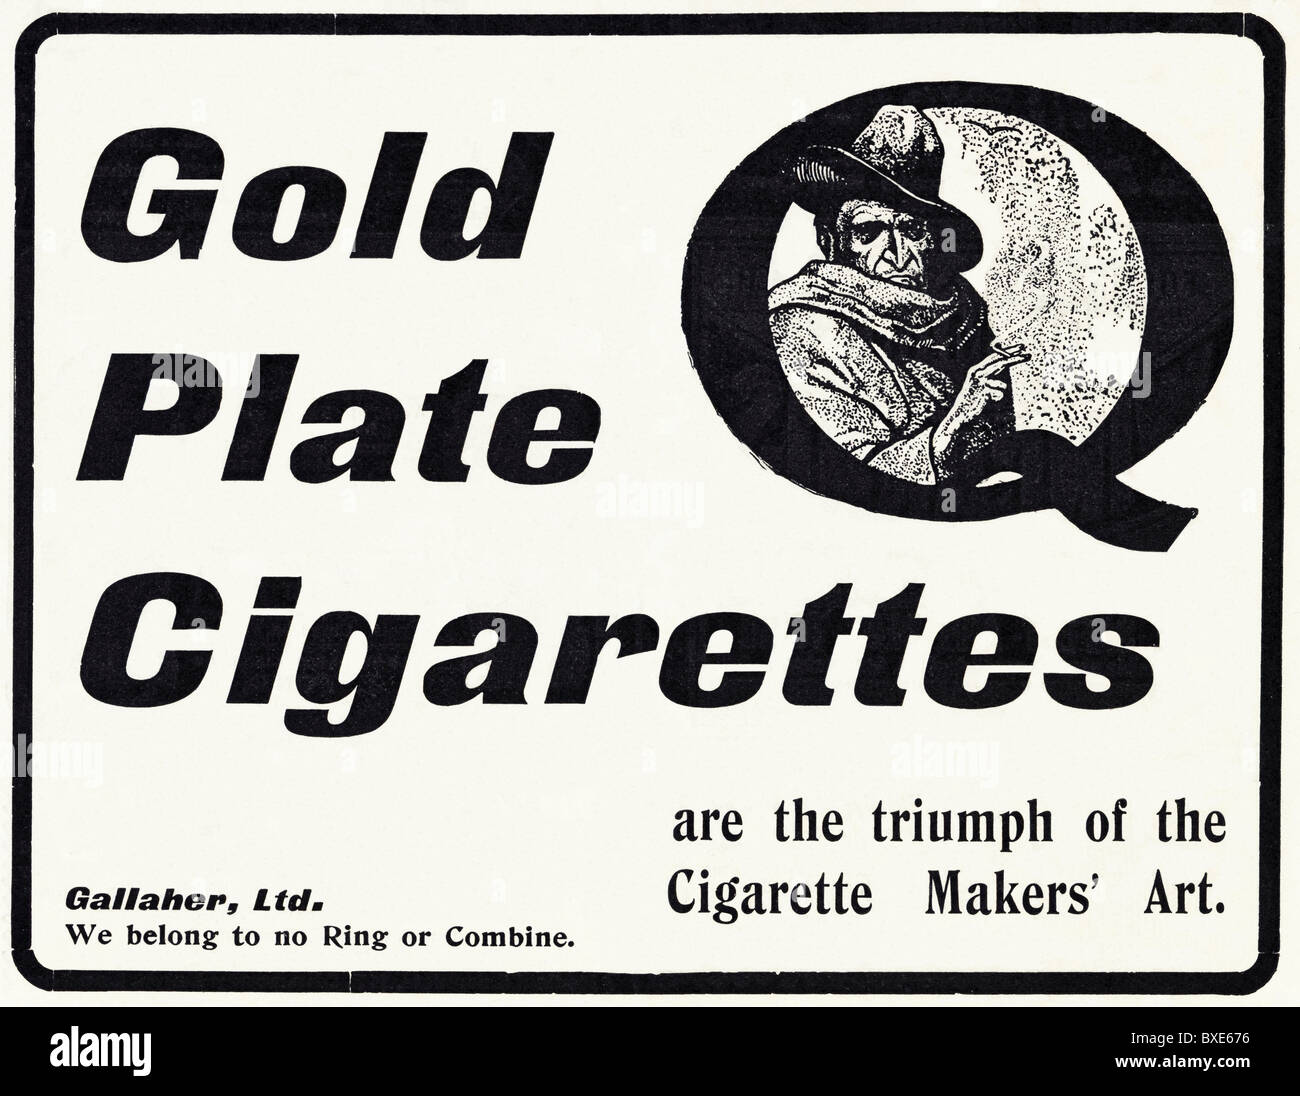 Edwardian advert for Gallaher Gold Plate cigarettes circa 1904 Stock Photo